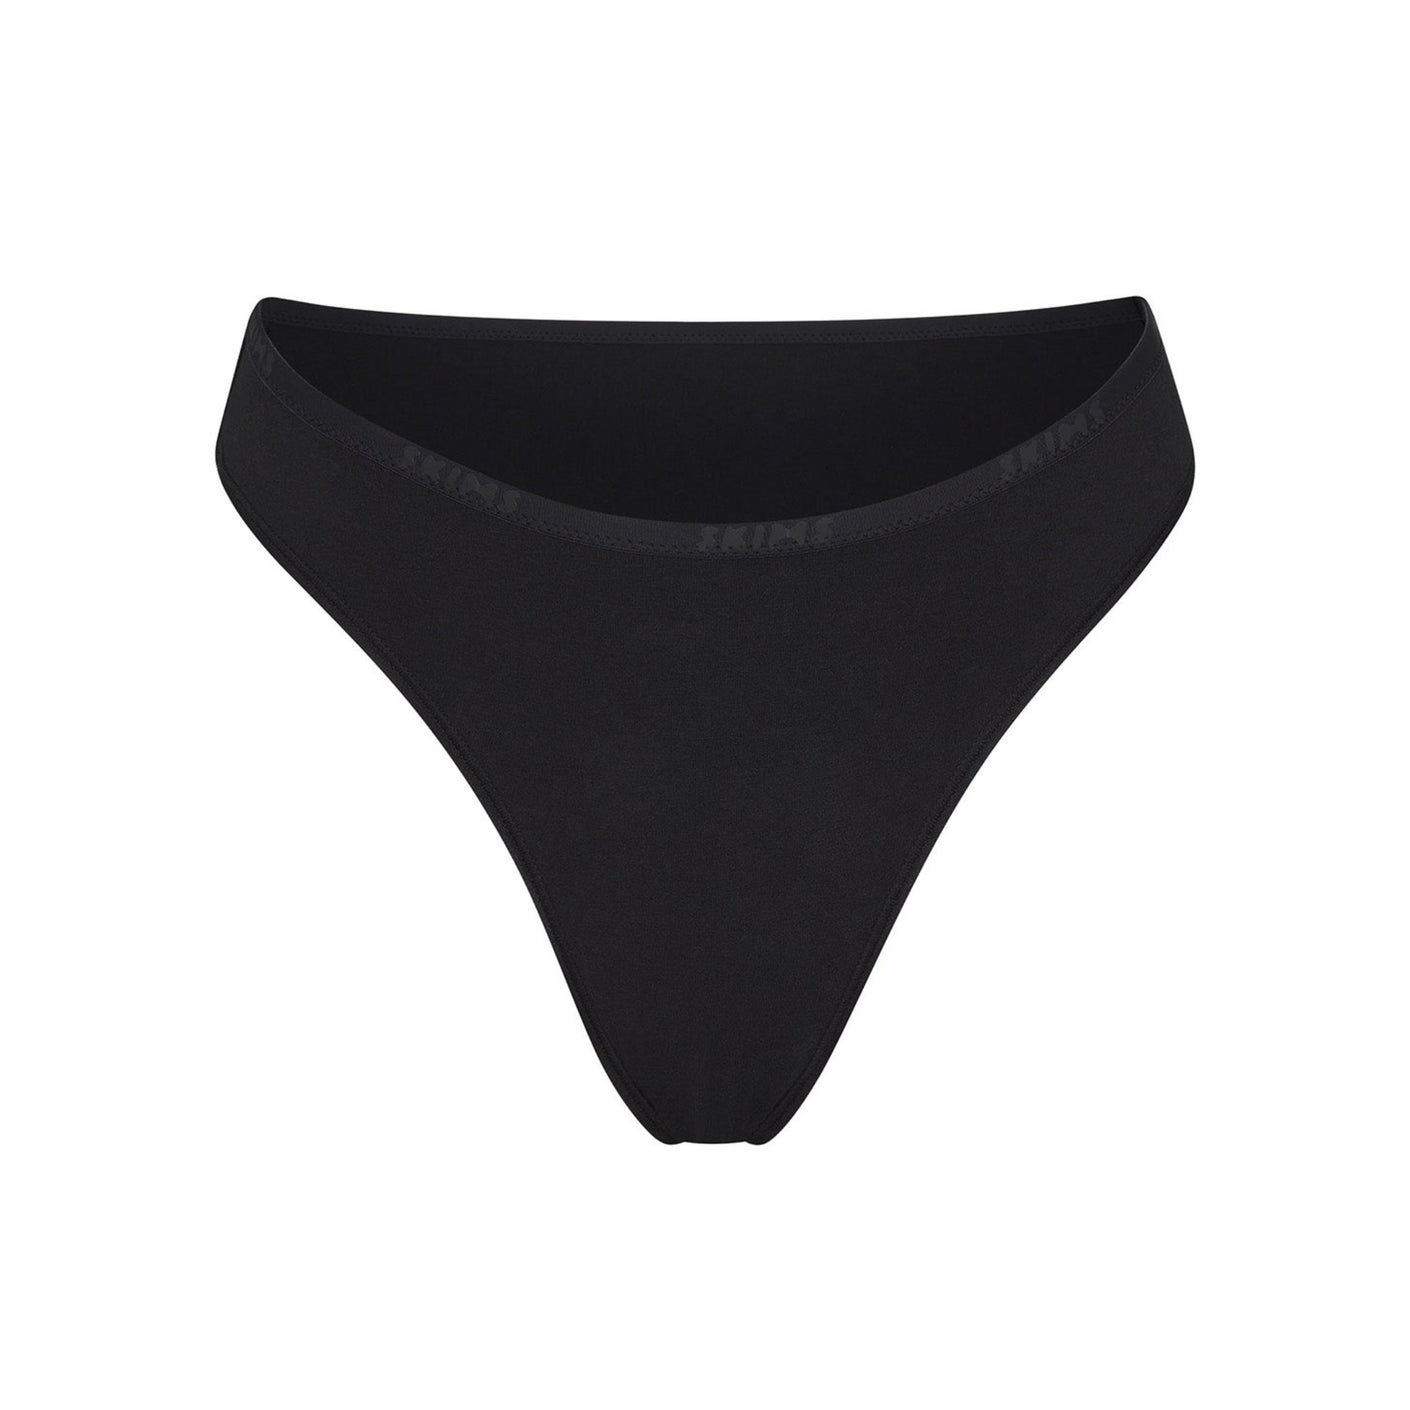 https://cdn.shopify.com/s/files/1/0259/5448/4284/products/SKIMS-PANTY-PN-BIK-2003-SOT_fe8c5136-3e61-423b-988c-7a8259fe1c63.jpg?v=1660857598&width=1410&height=1410